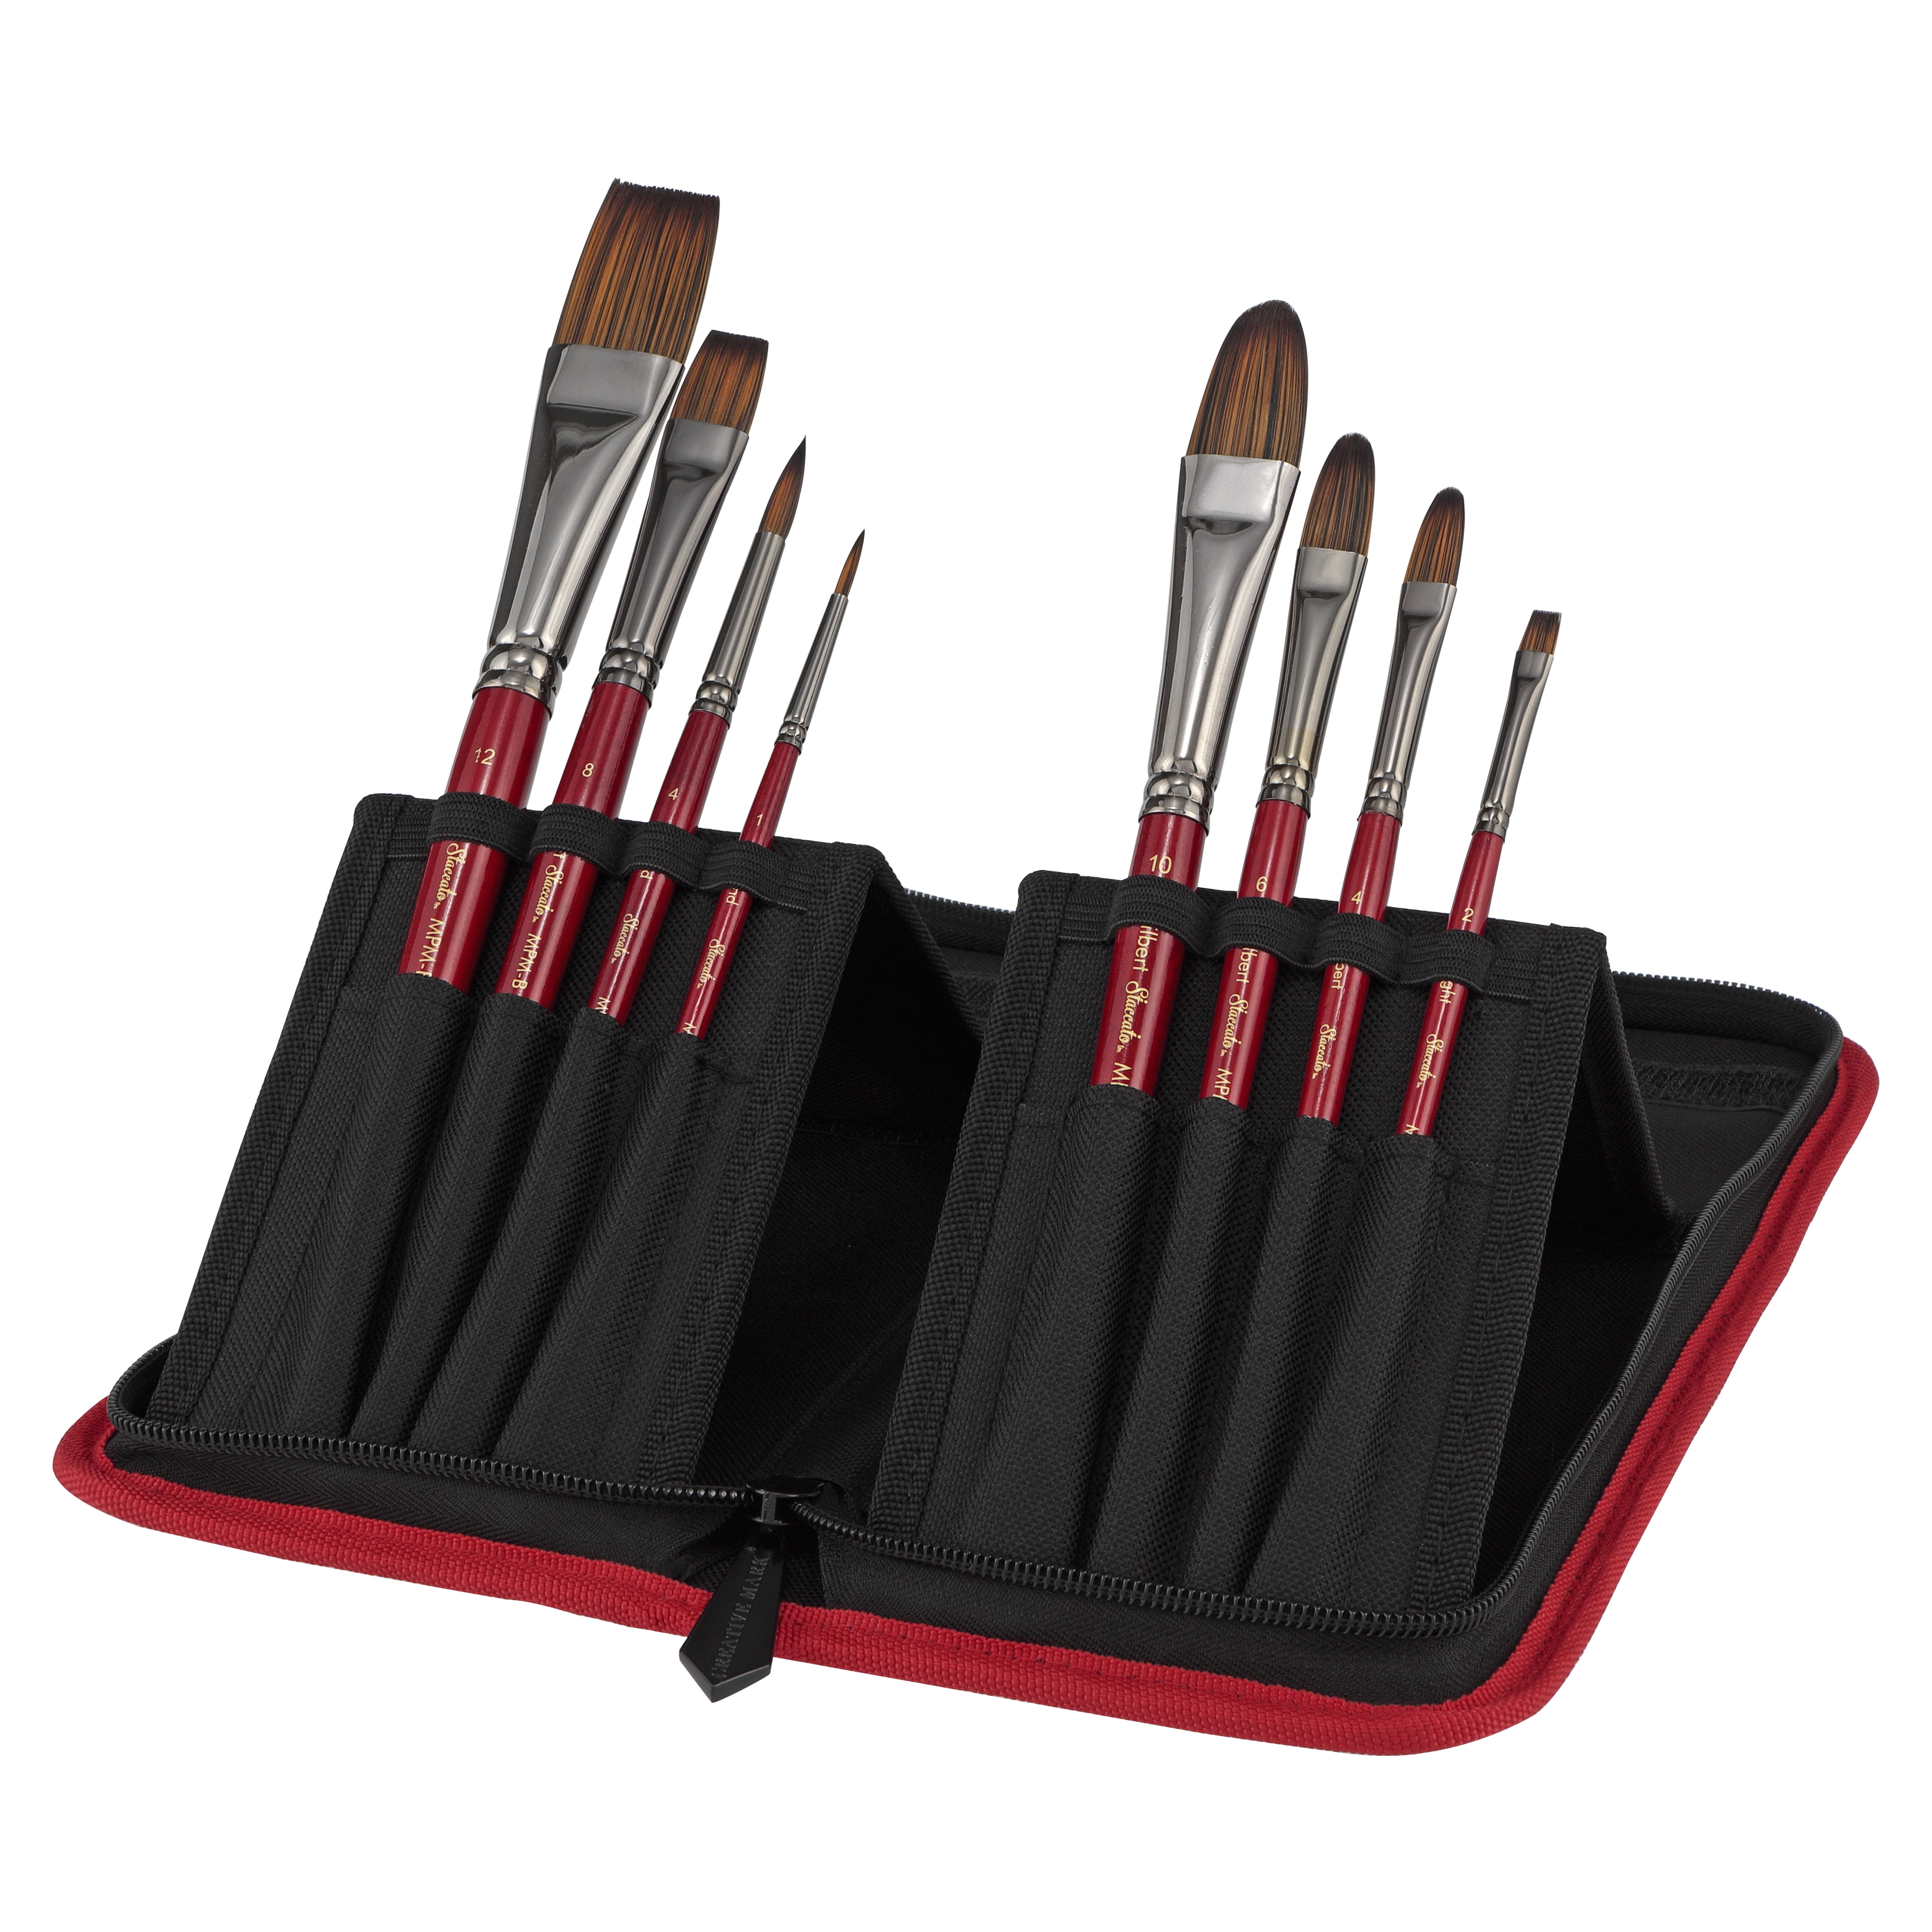 Oil 6 Piece Filbert Paint Brush Set,Rock Ninja Artist cat Tongue Brush Made of Premium red Sable Hair for Acrylic Creative Body Paint Watercolor Decorating and Gouache Painting 